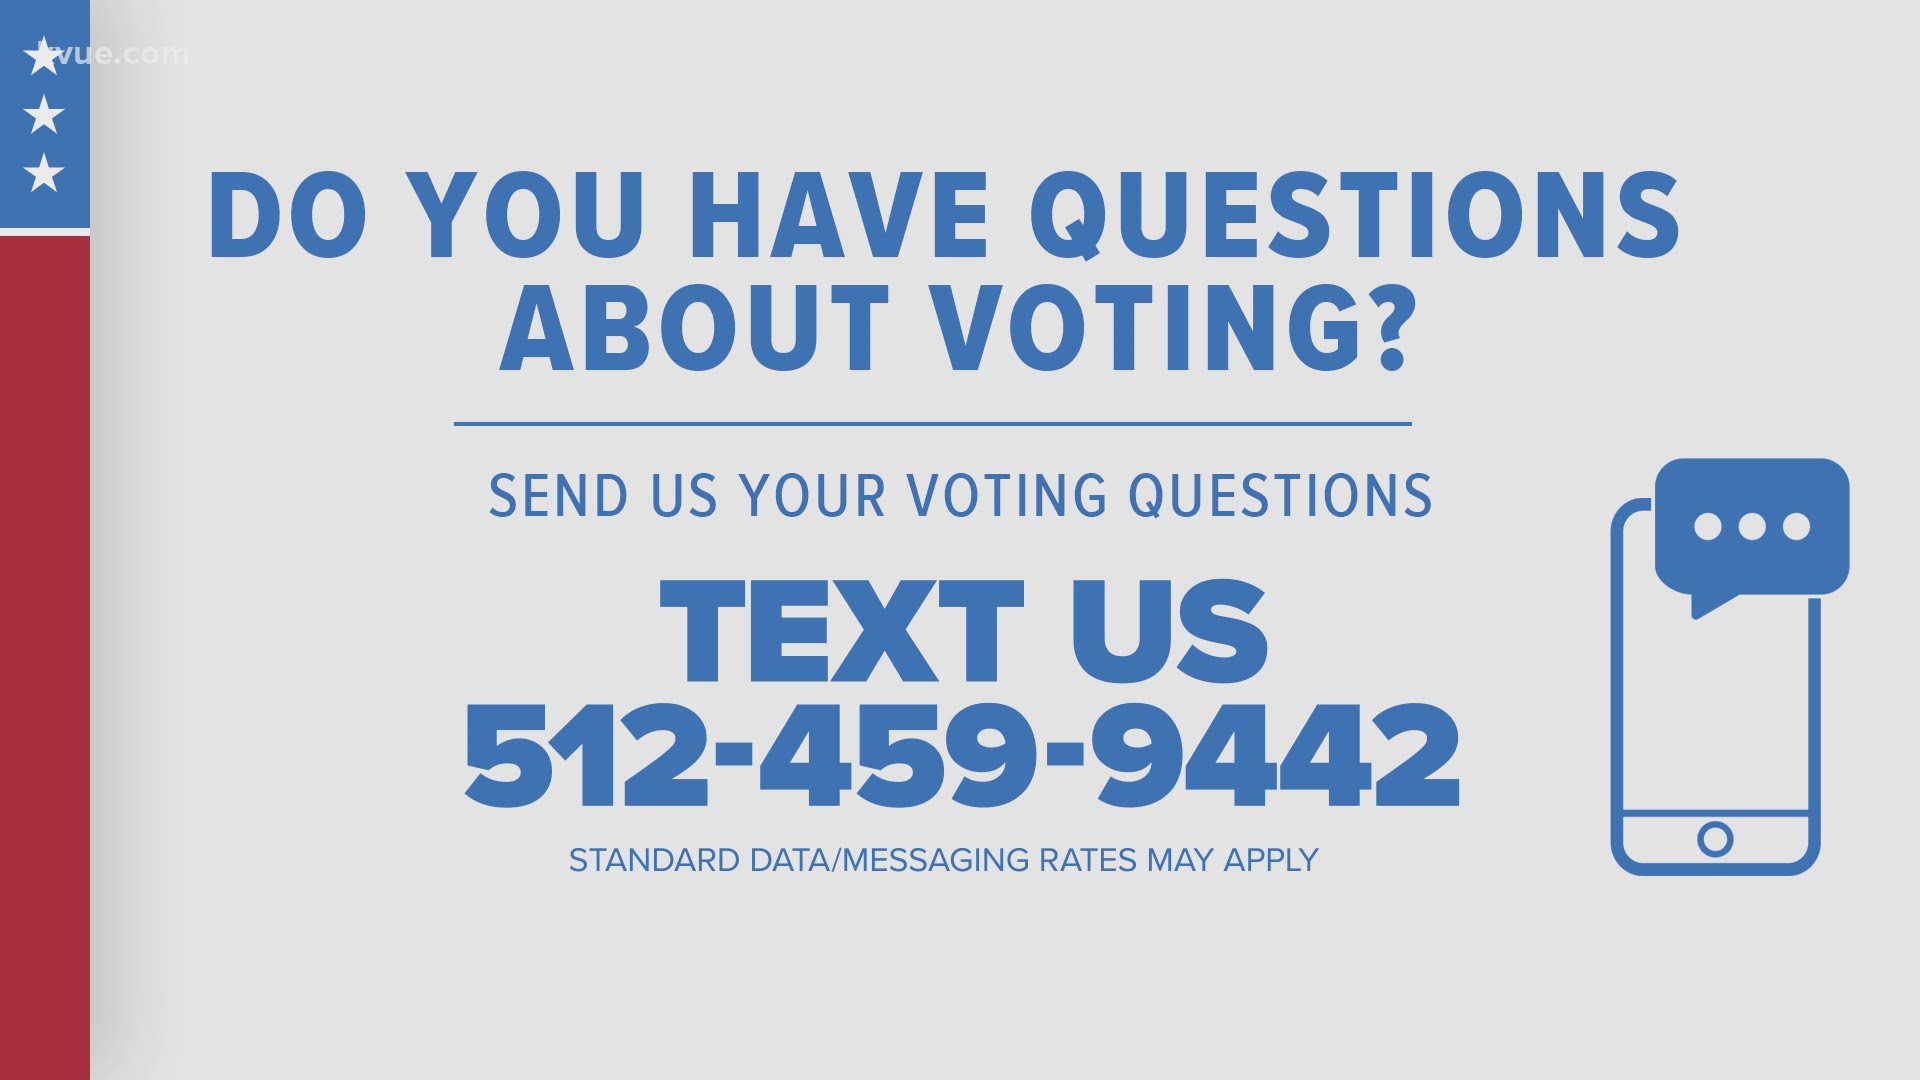 The KVUE Defenders are continuing to take your election questions. If you have a question you'd like KVUE to answer, text 512-459-9442.